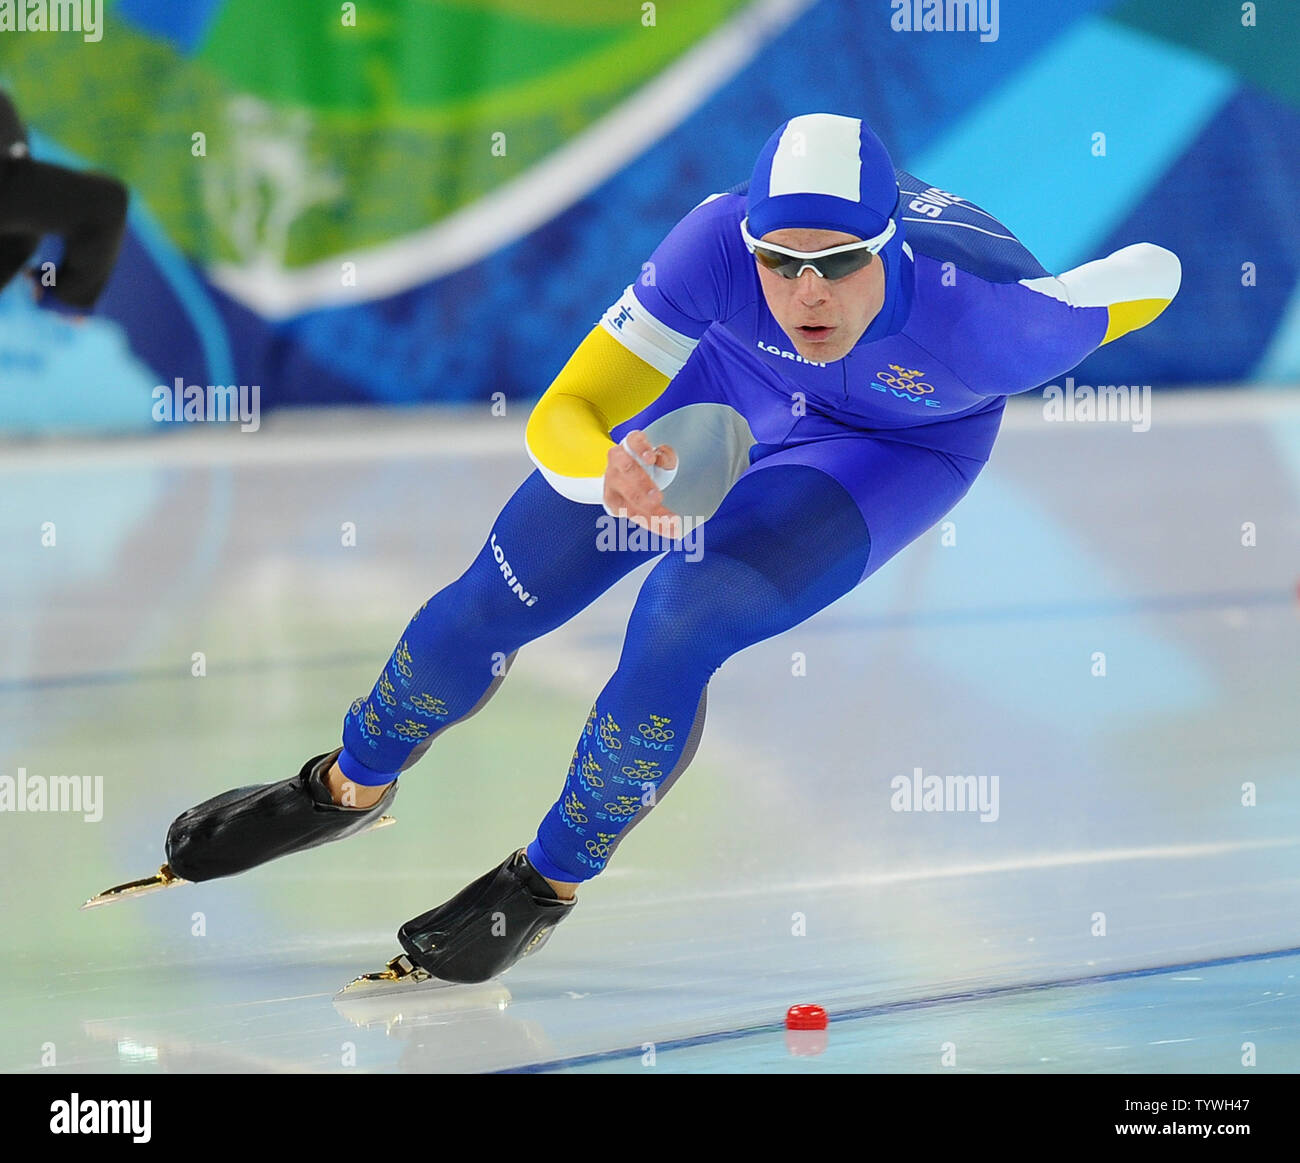 Sweden's Daniel Friberg competes in men's 1500 meter speed skating at the  Richmond Olympic Oval in Vancouver, Canada, during the 2010 Winter Olympics  on February 20, 2010. UPI/Roger L. Wollenberg Stock Photo - Alamy